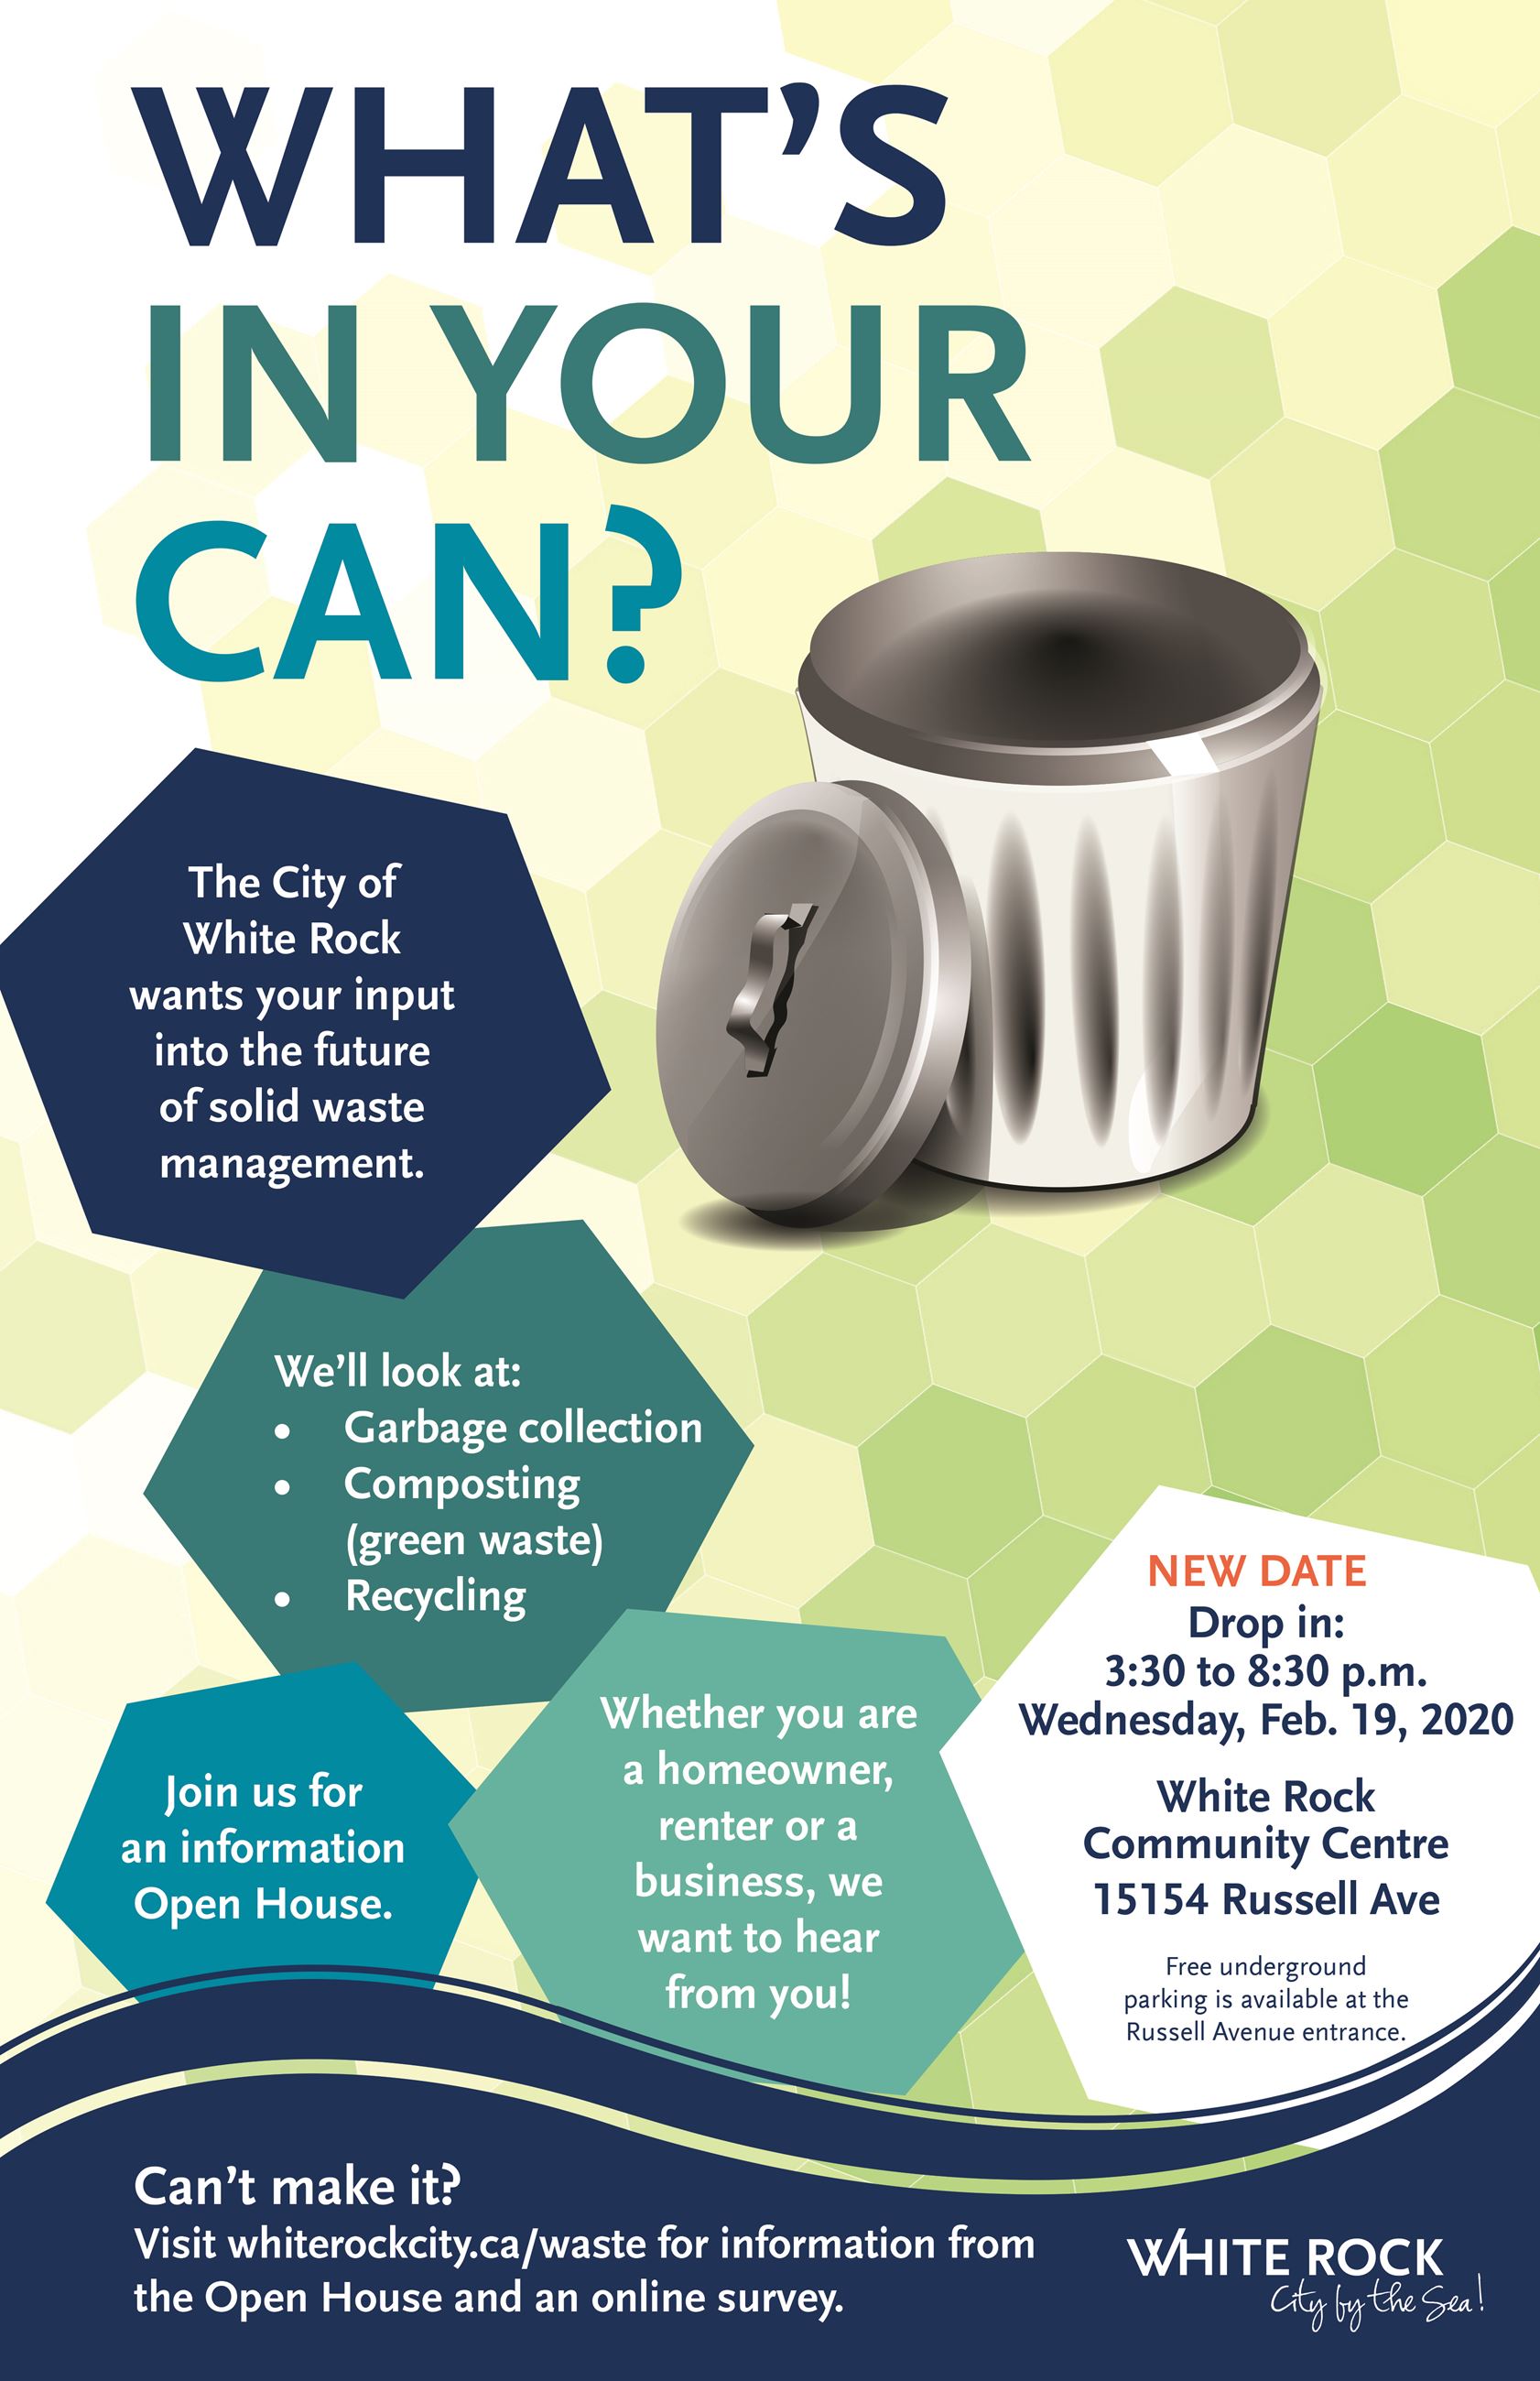 Whats in your can poster Feb 19